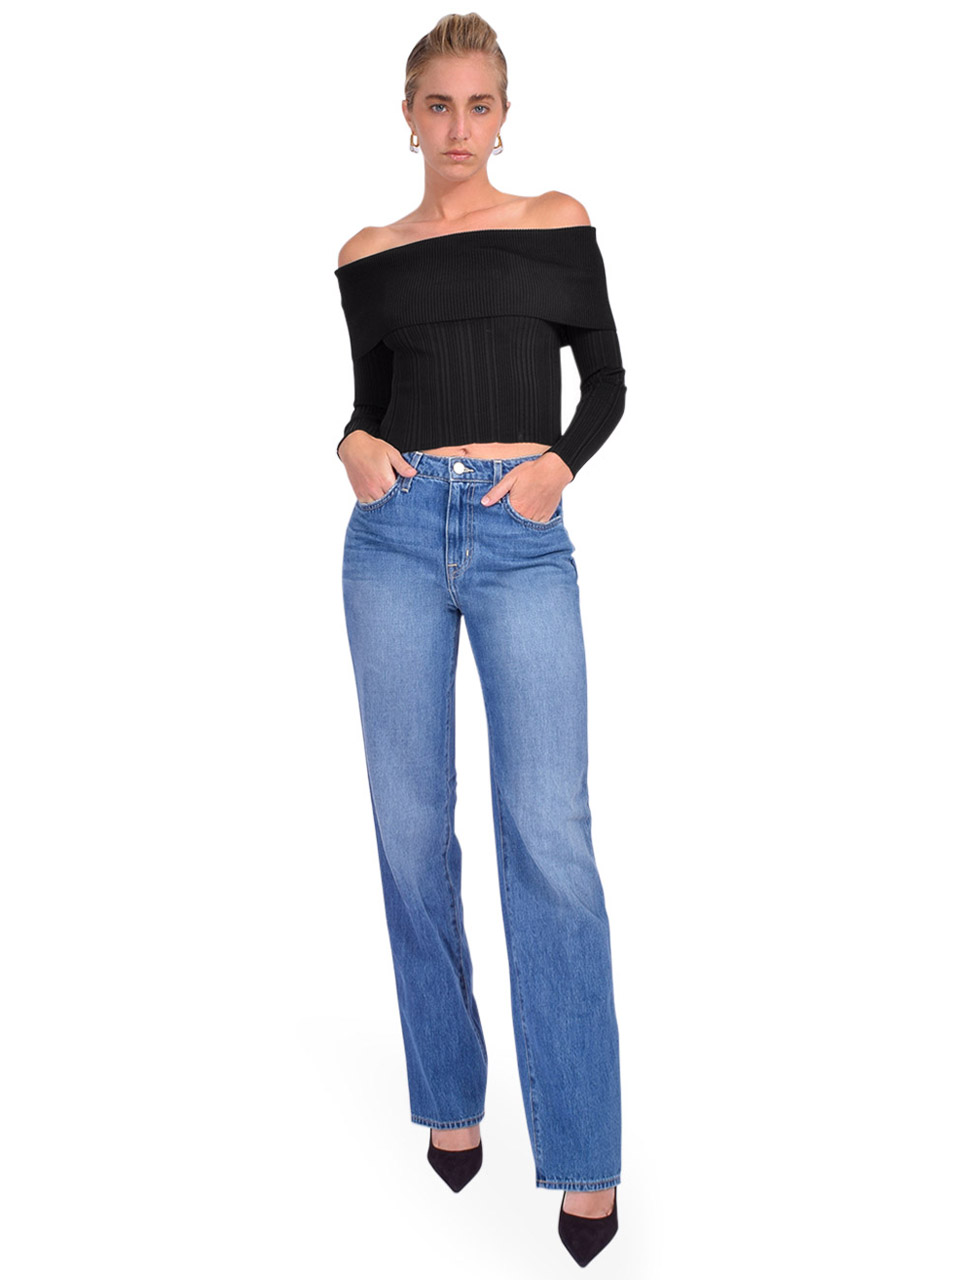 L'AGENCE Jones Ultra High Rise Stovepipe Jean in Boyle Full Outfit 